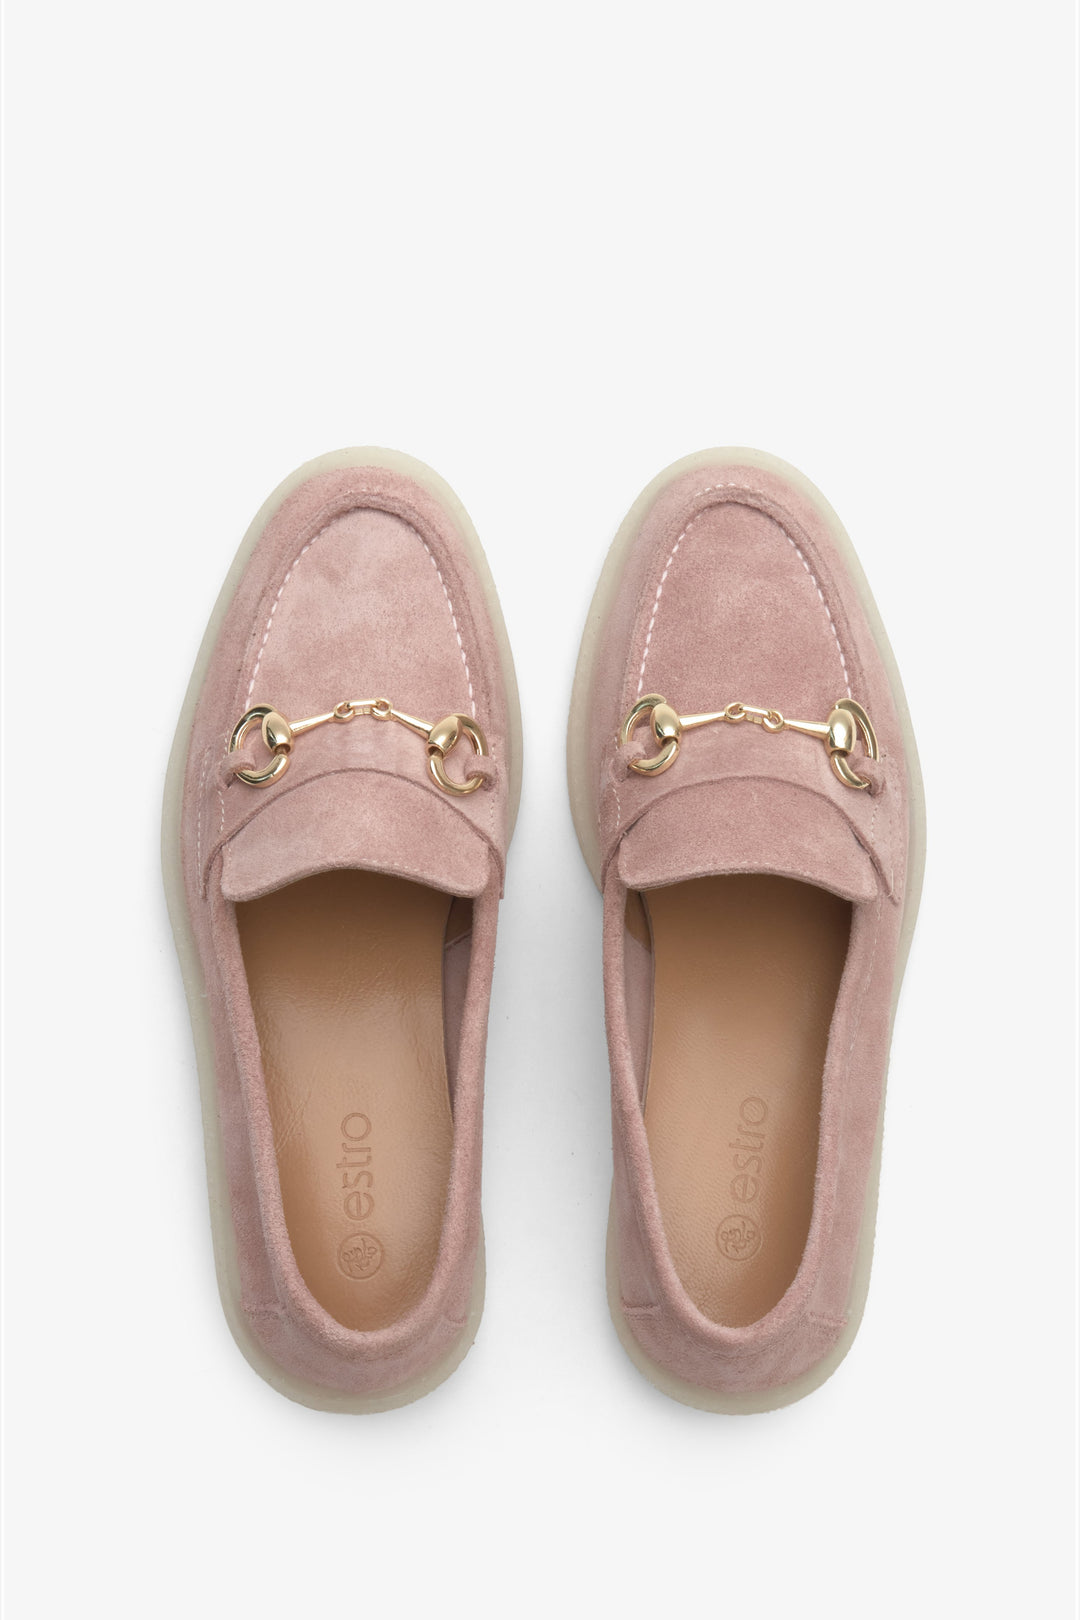 Light pink women's loafers made of velour and leather by Estro